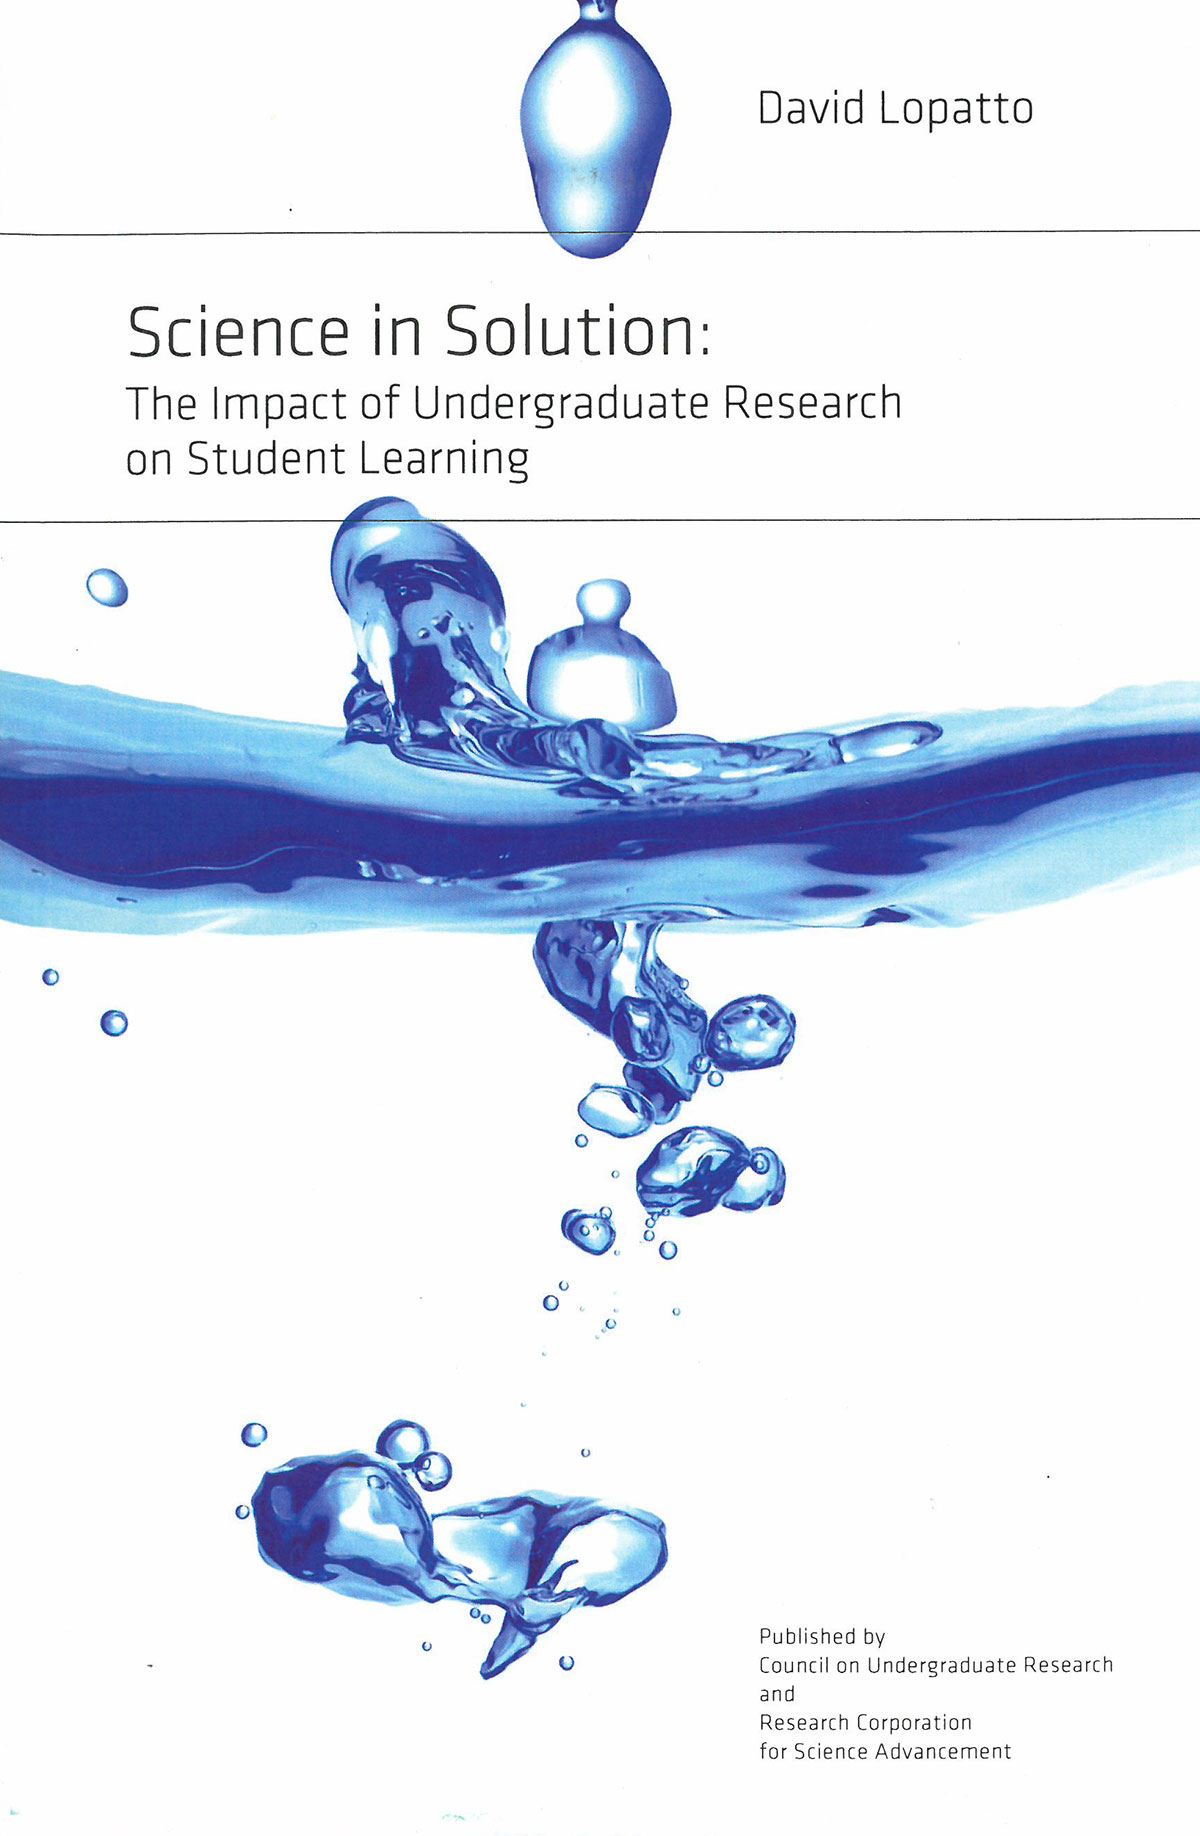 Science in Solution: The Impact of Undergraduate Research on Student Learning